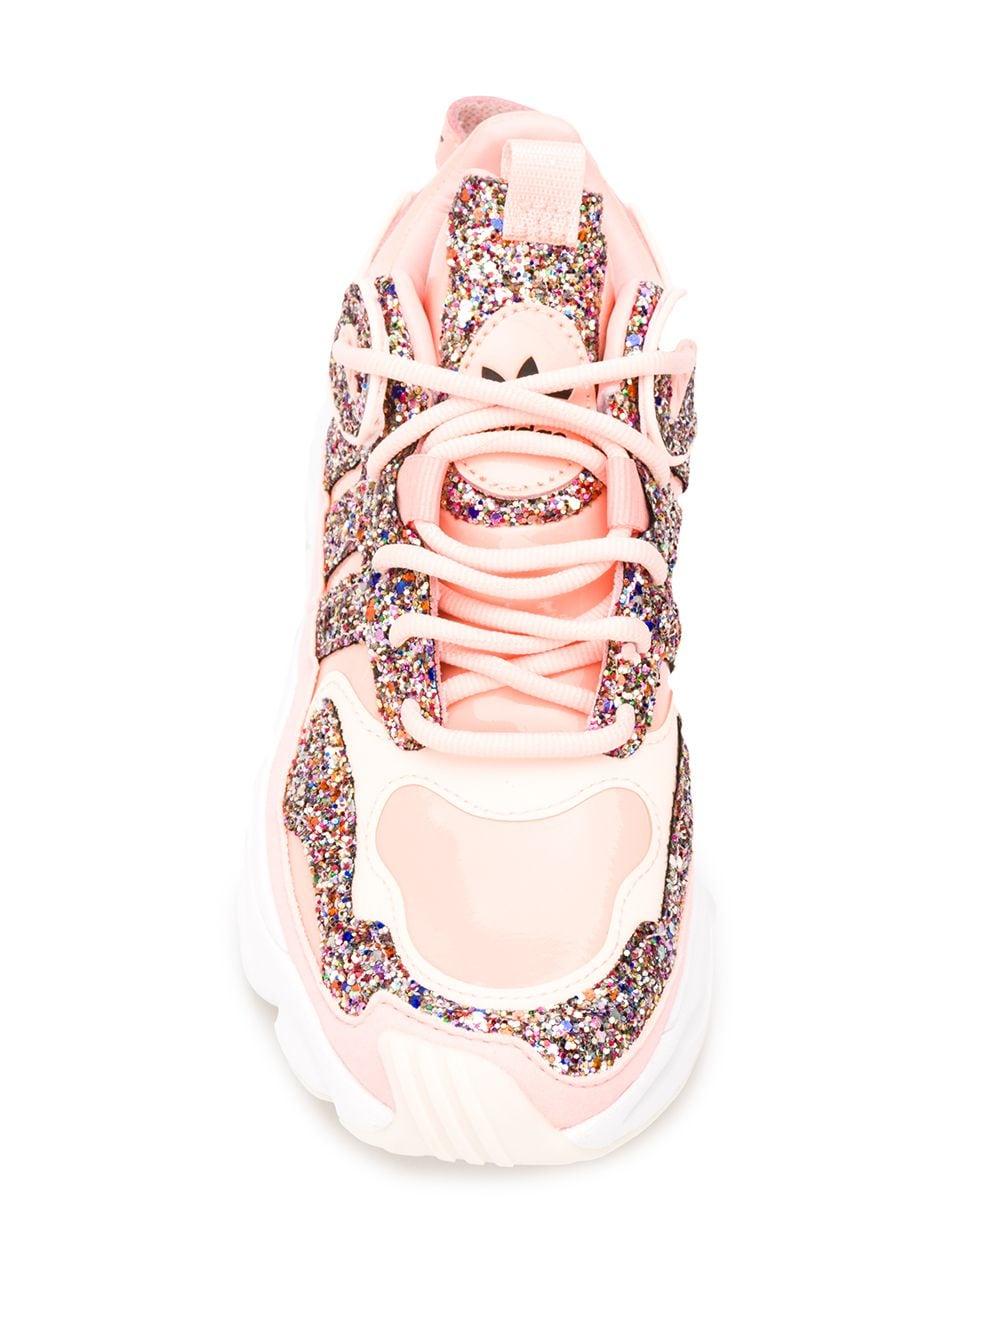 Conflict Misbruik veld adidas Glitter Sneakers in Pink | Lyst